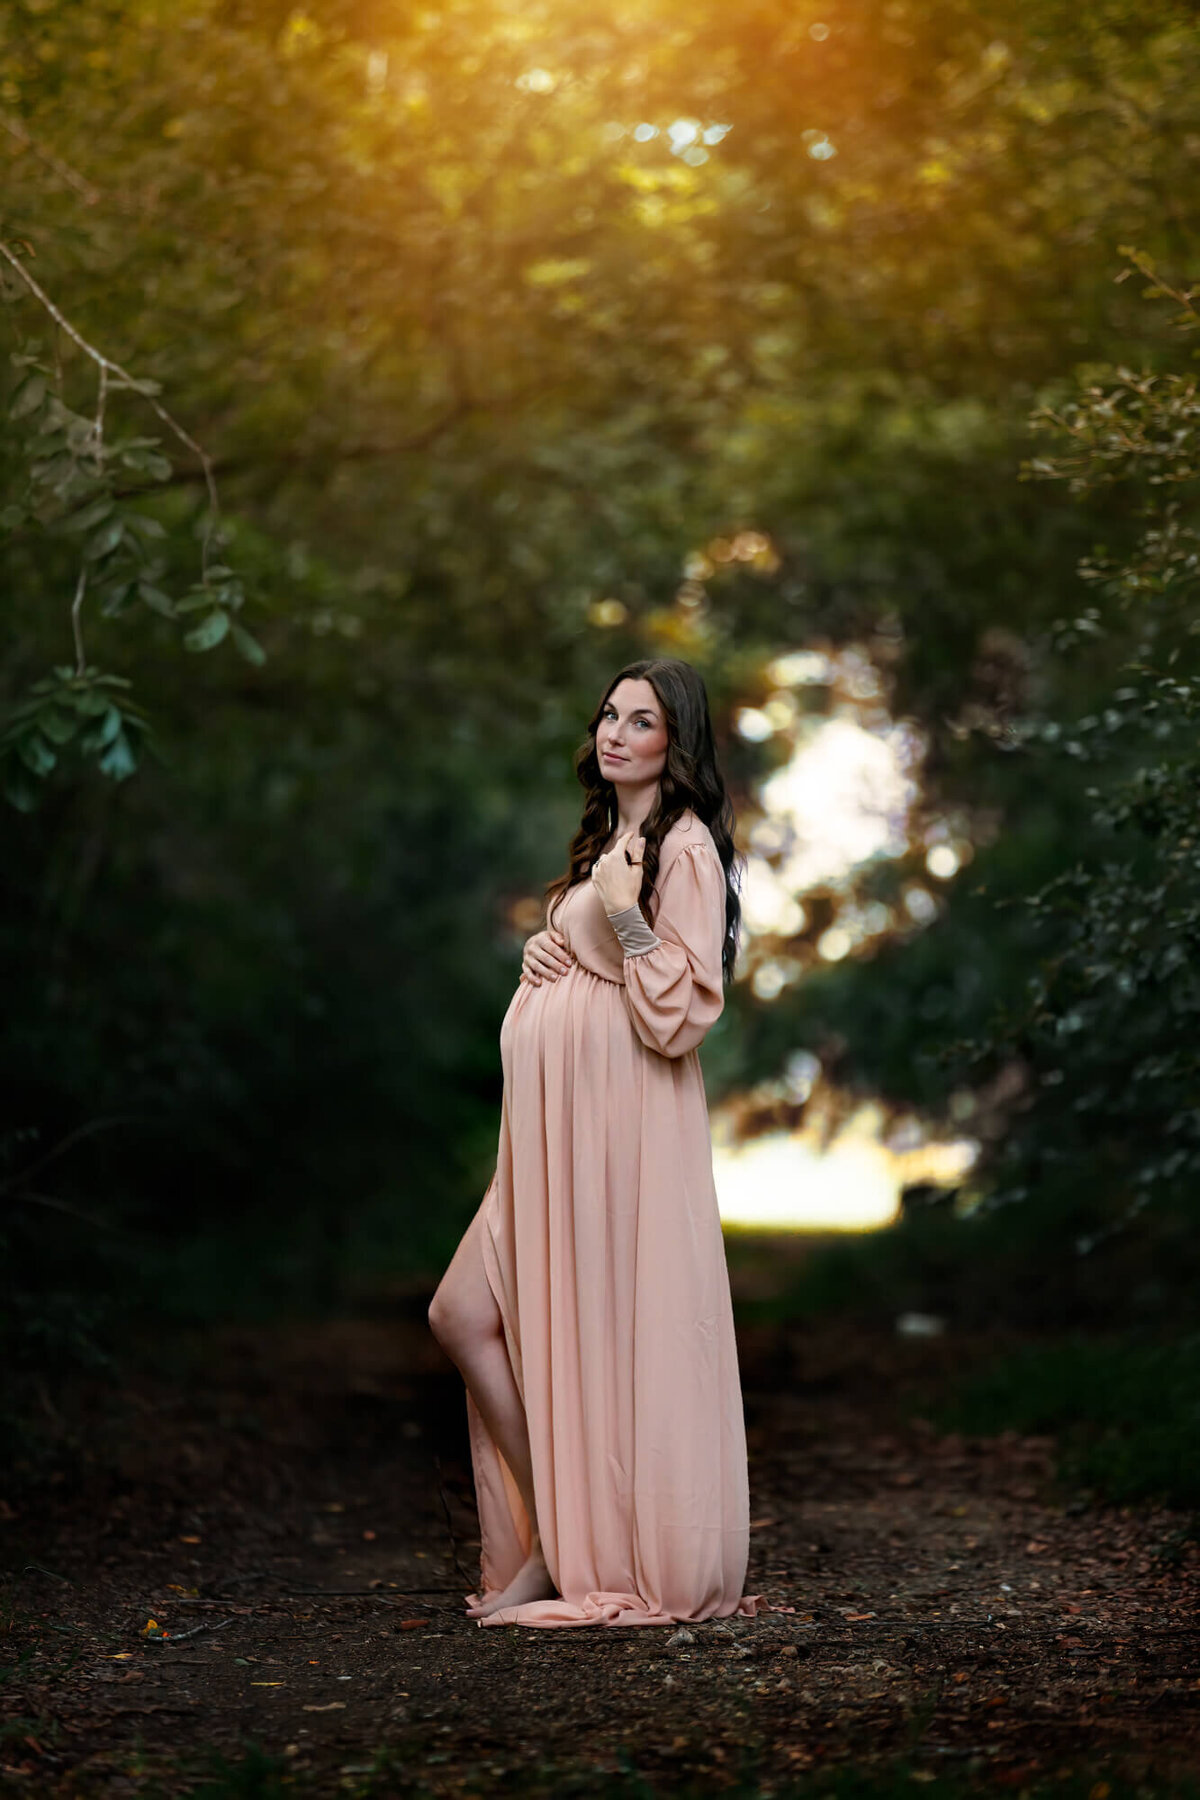 Beautiful golden hour session for an expectant momma in Houston